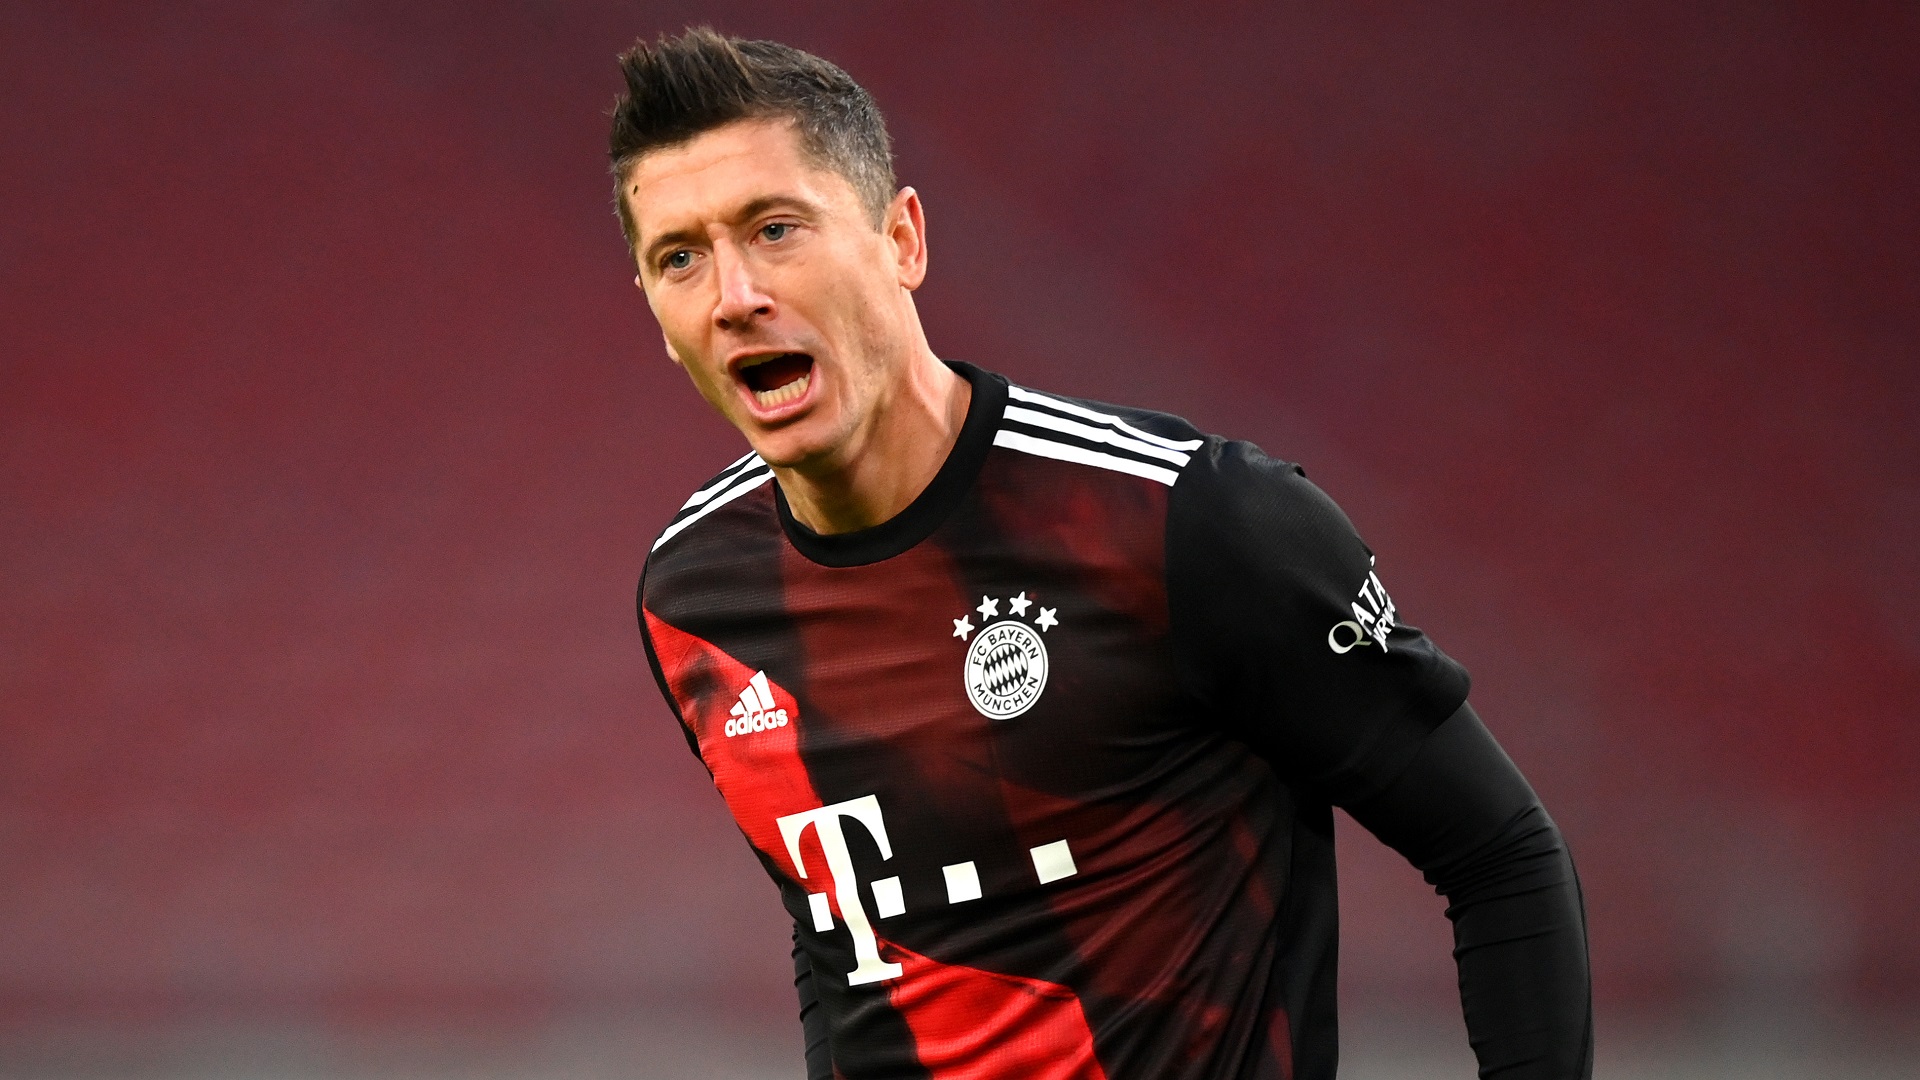 'I was ready' - Lewandowski admits he wanted to join Manchester United